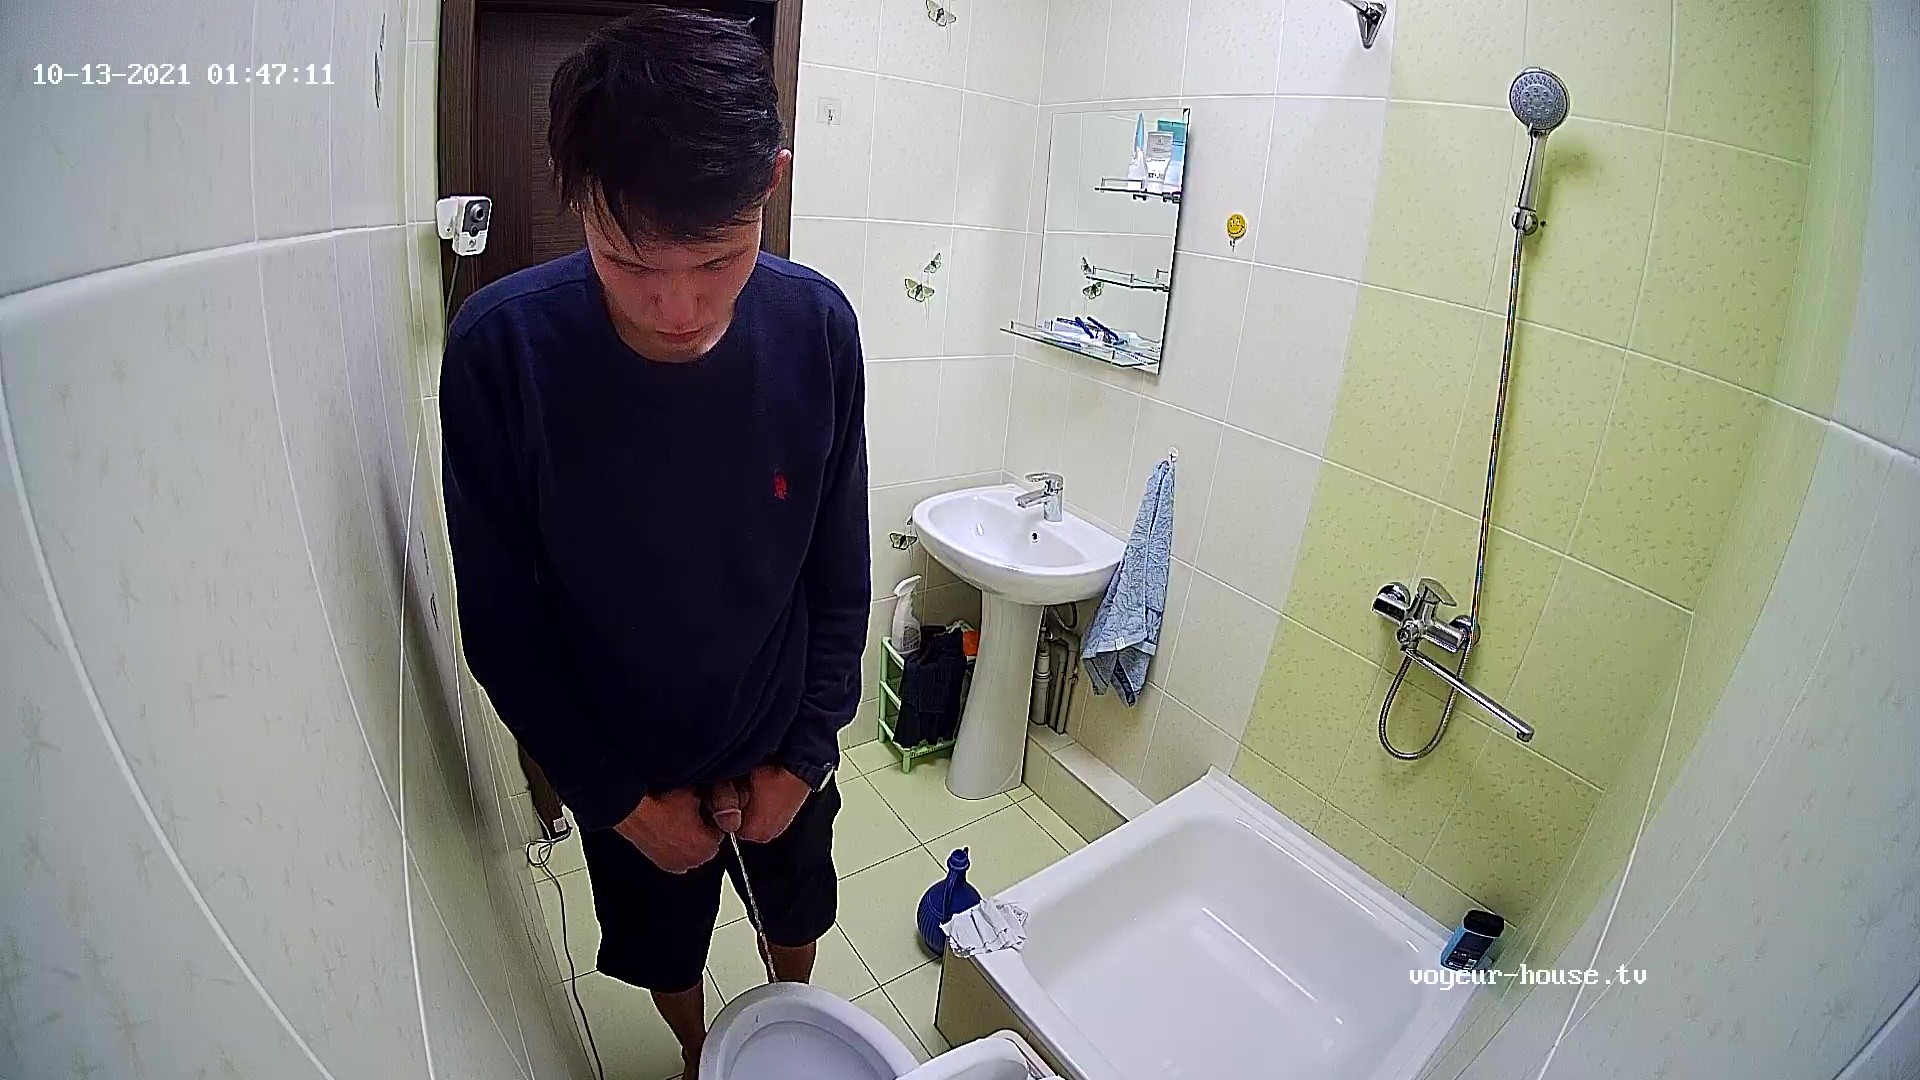 Denys peeing 13 Oct 2021 1.45am